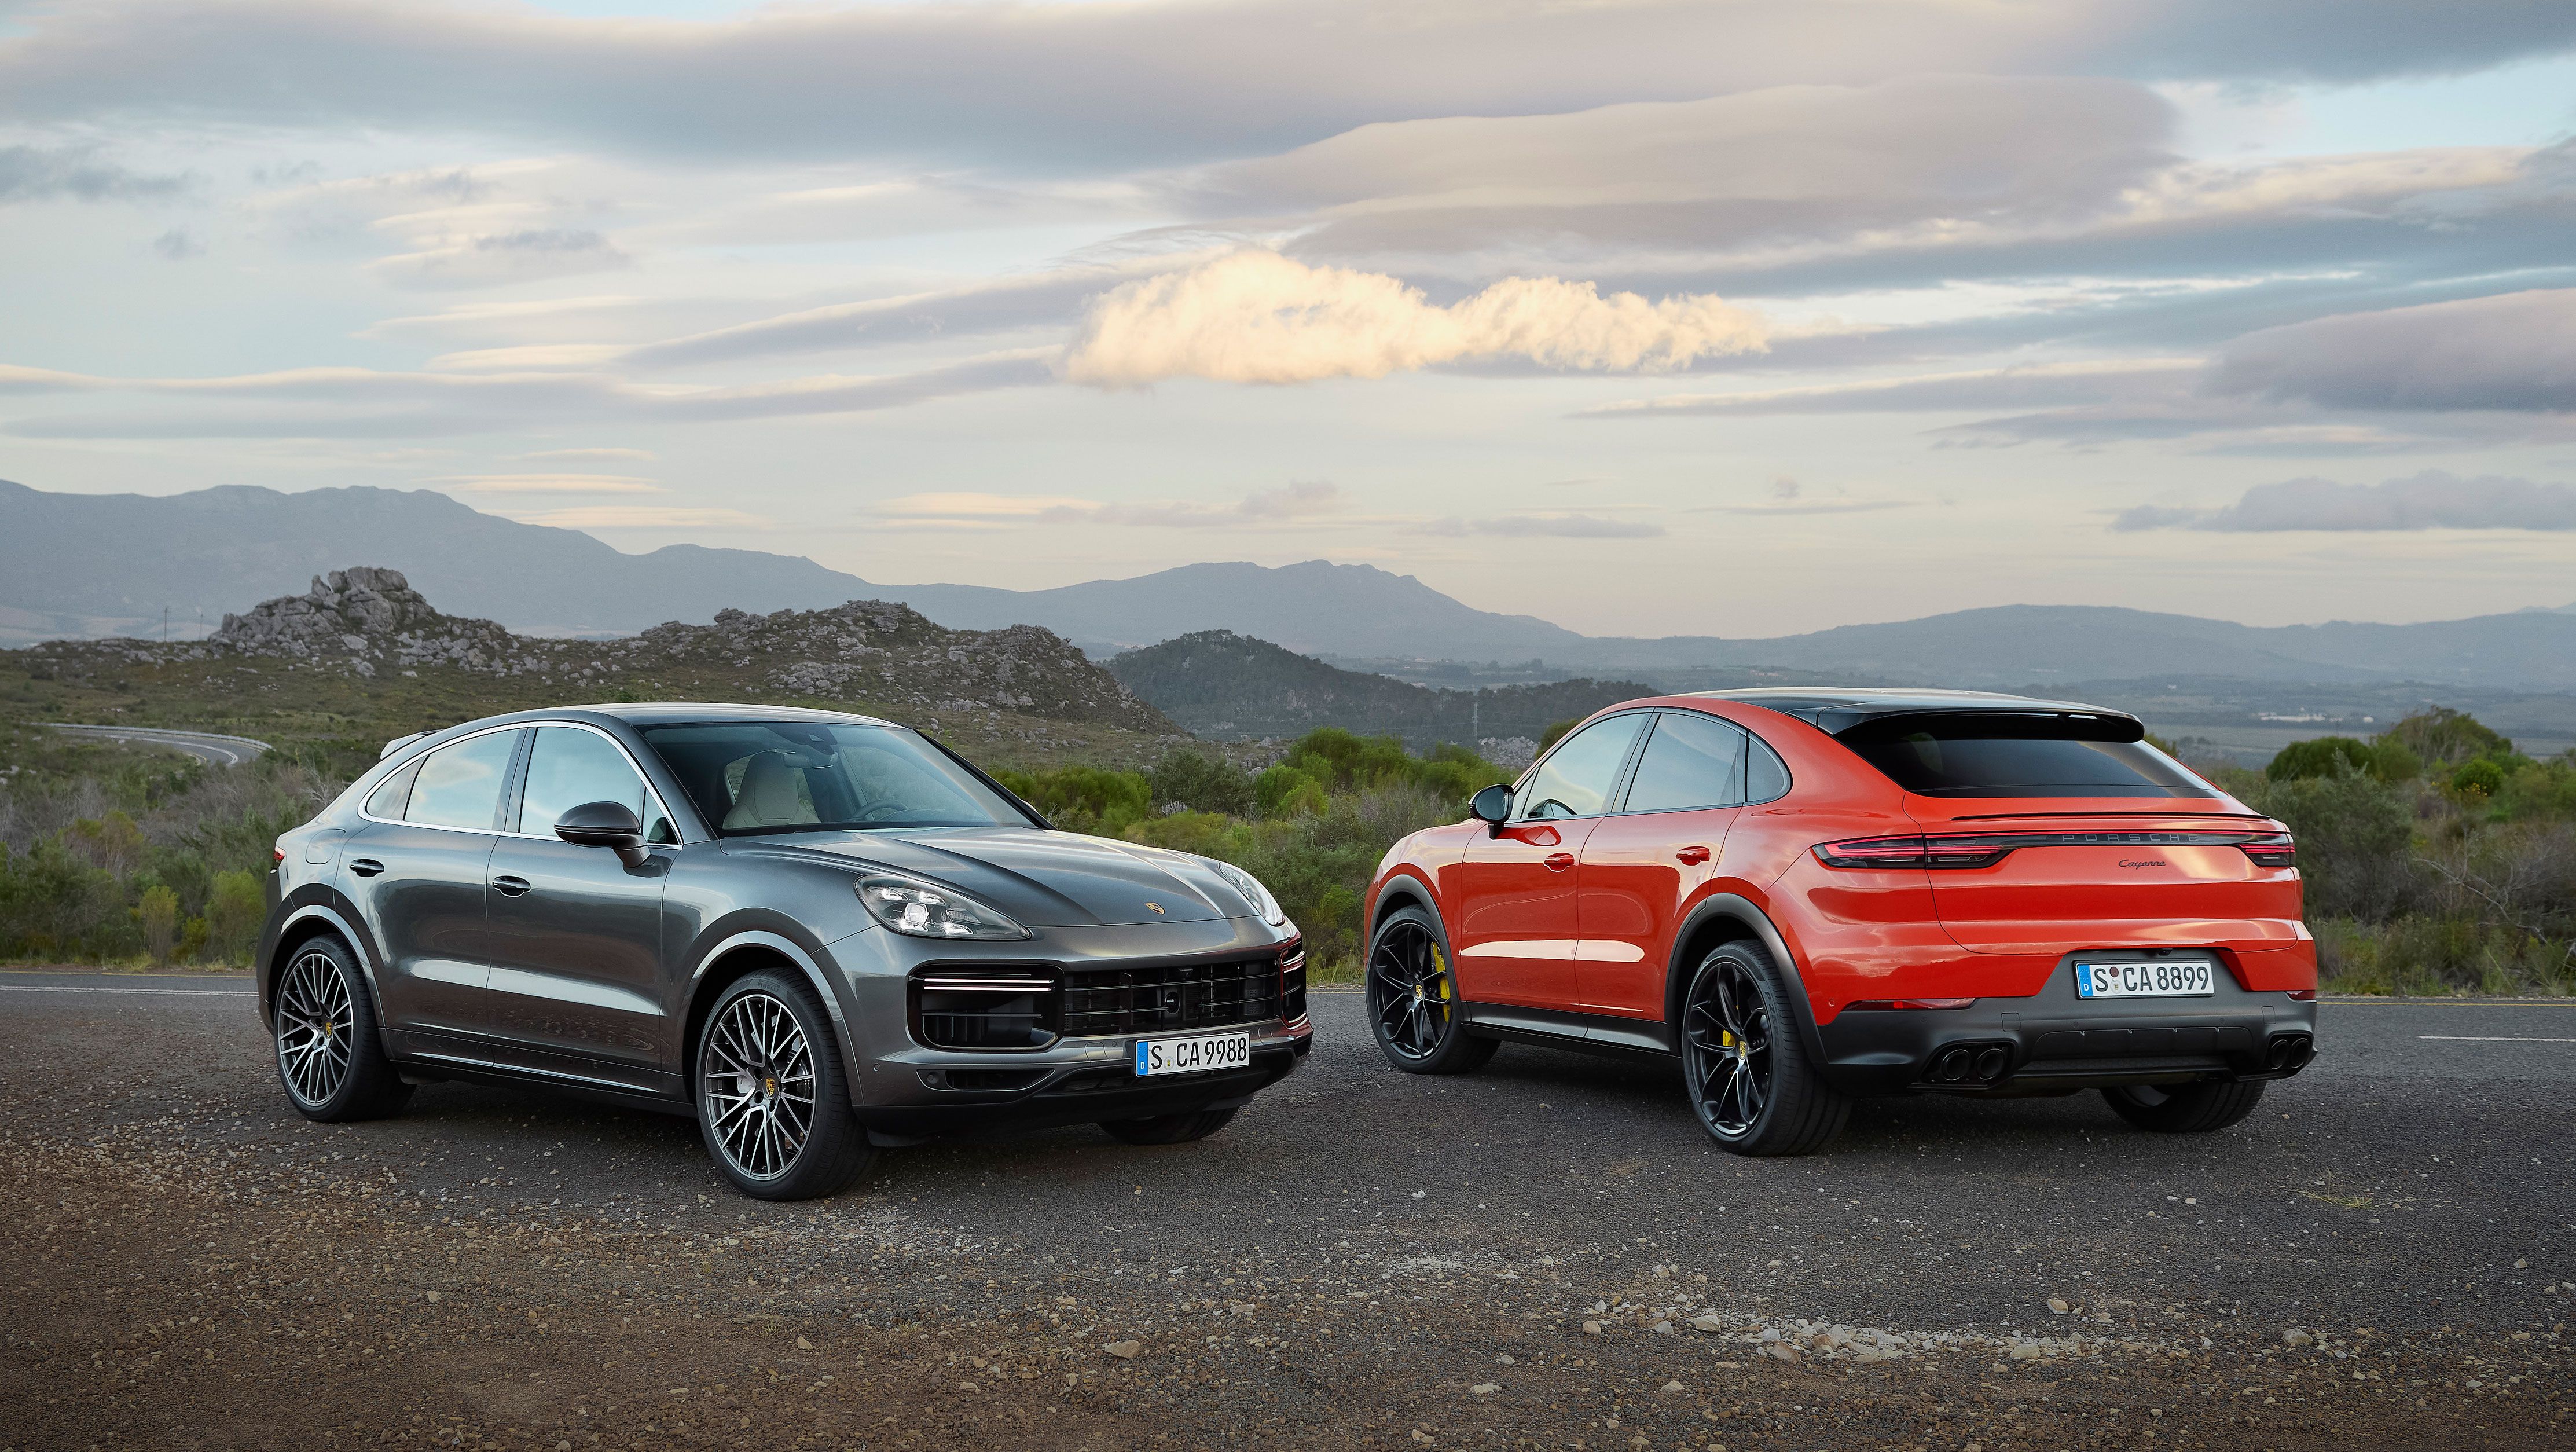 2019 Wallpaper of the Day: 2020 Porsche Cayenne Coupe